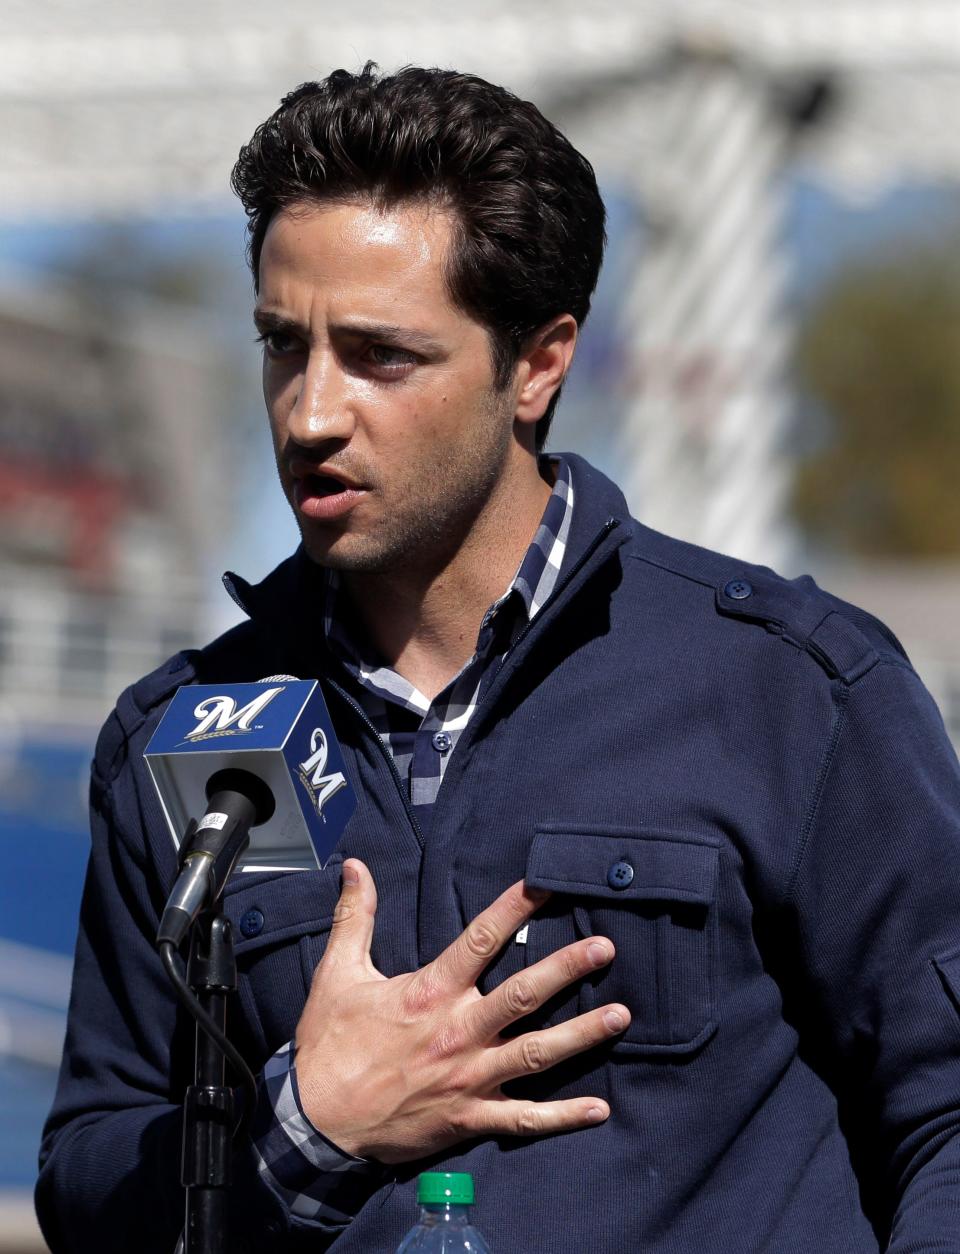 Ryan Braun speaks during a news conference at the team's spring training baseball on Feb. 24, 2012, in Phoenix, to address his overturned 50-game drug suspension. It was the first time a baseball player successfully challenged a drug-related penalty in a grievance. Braun would eventually be suspended for 65 games during the 2013 season after being linked to a Biogenesis lab.